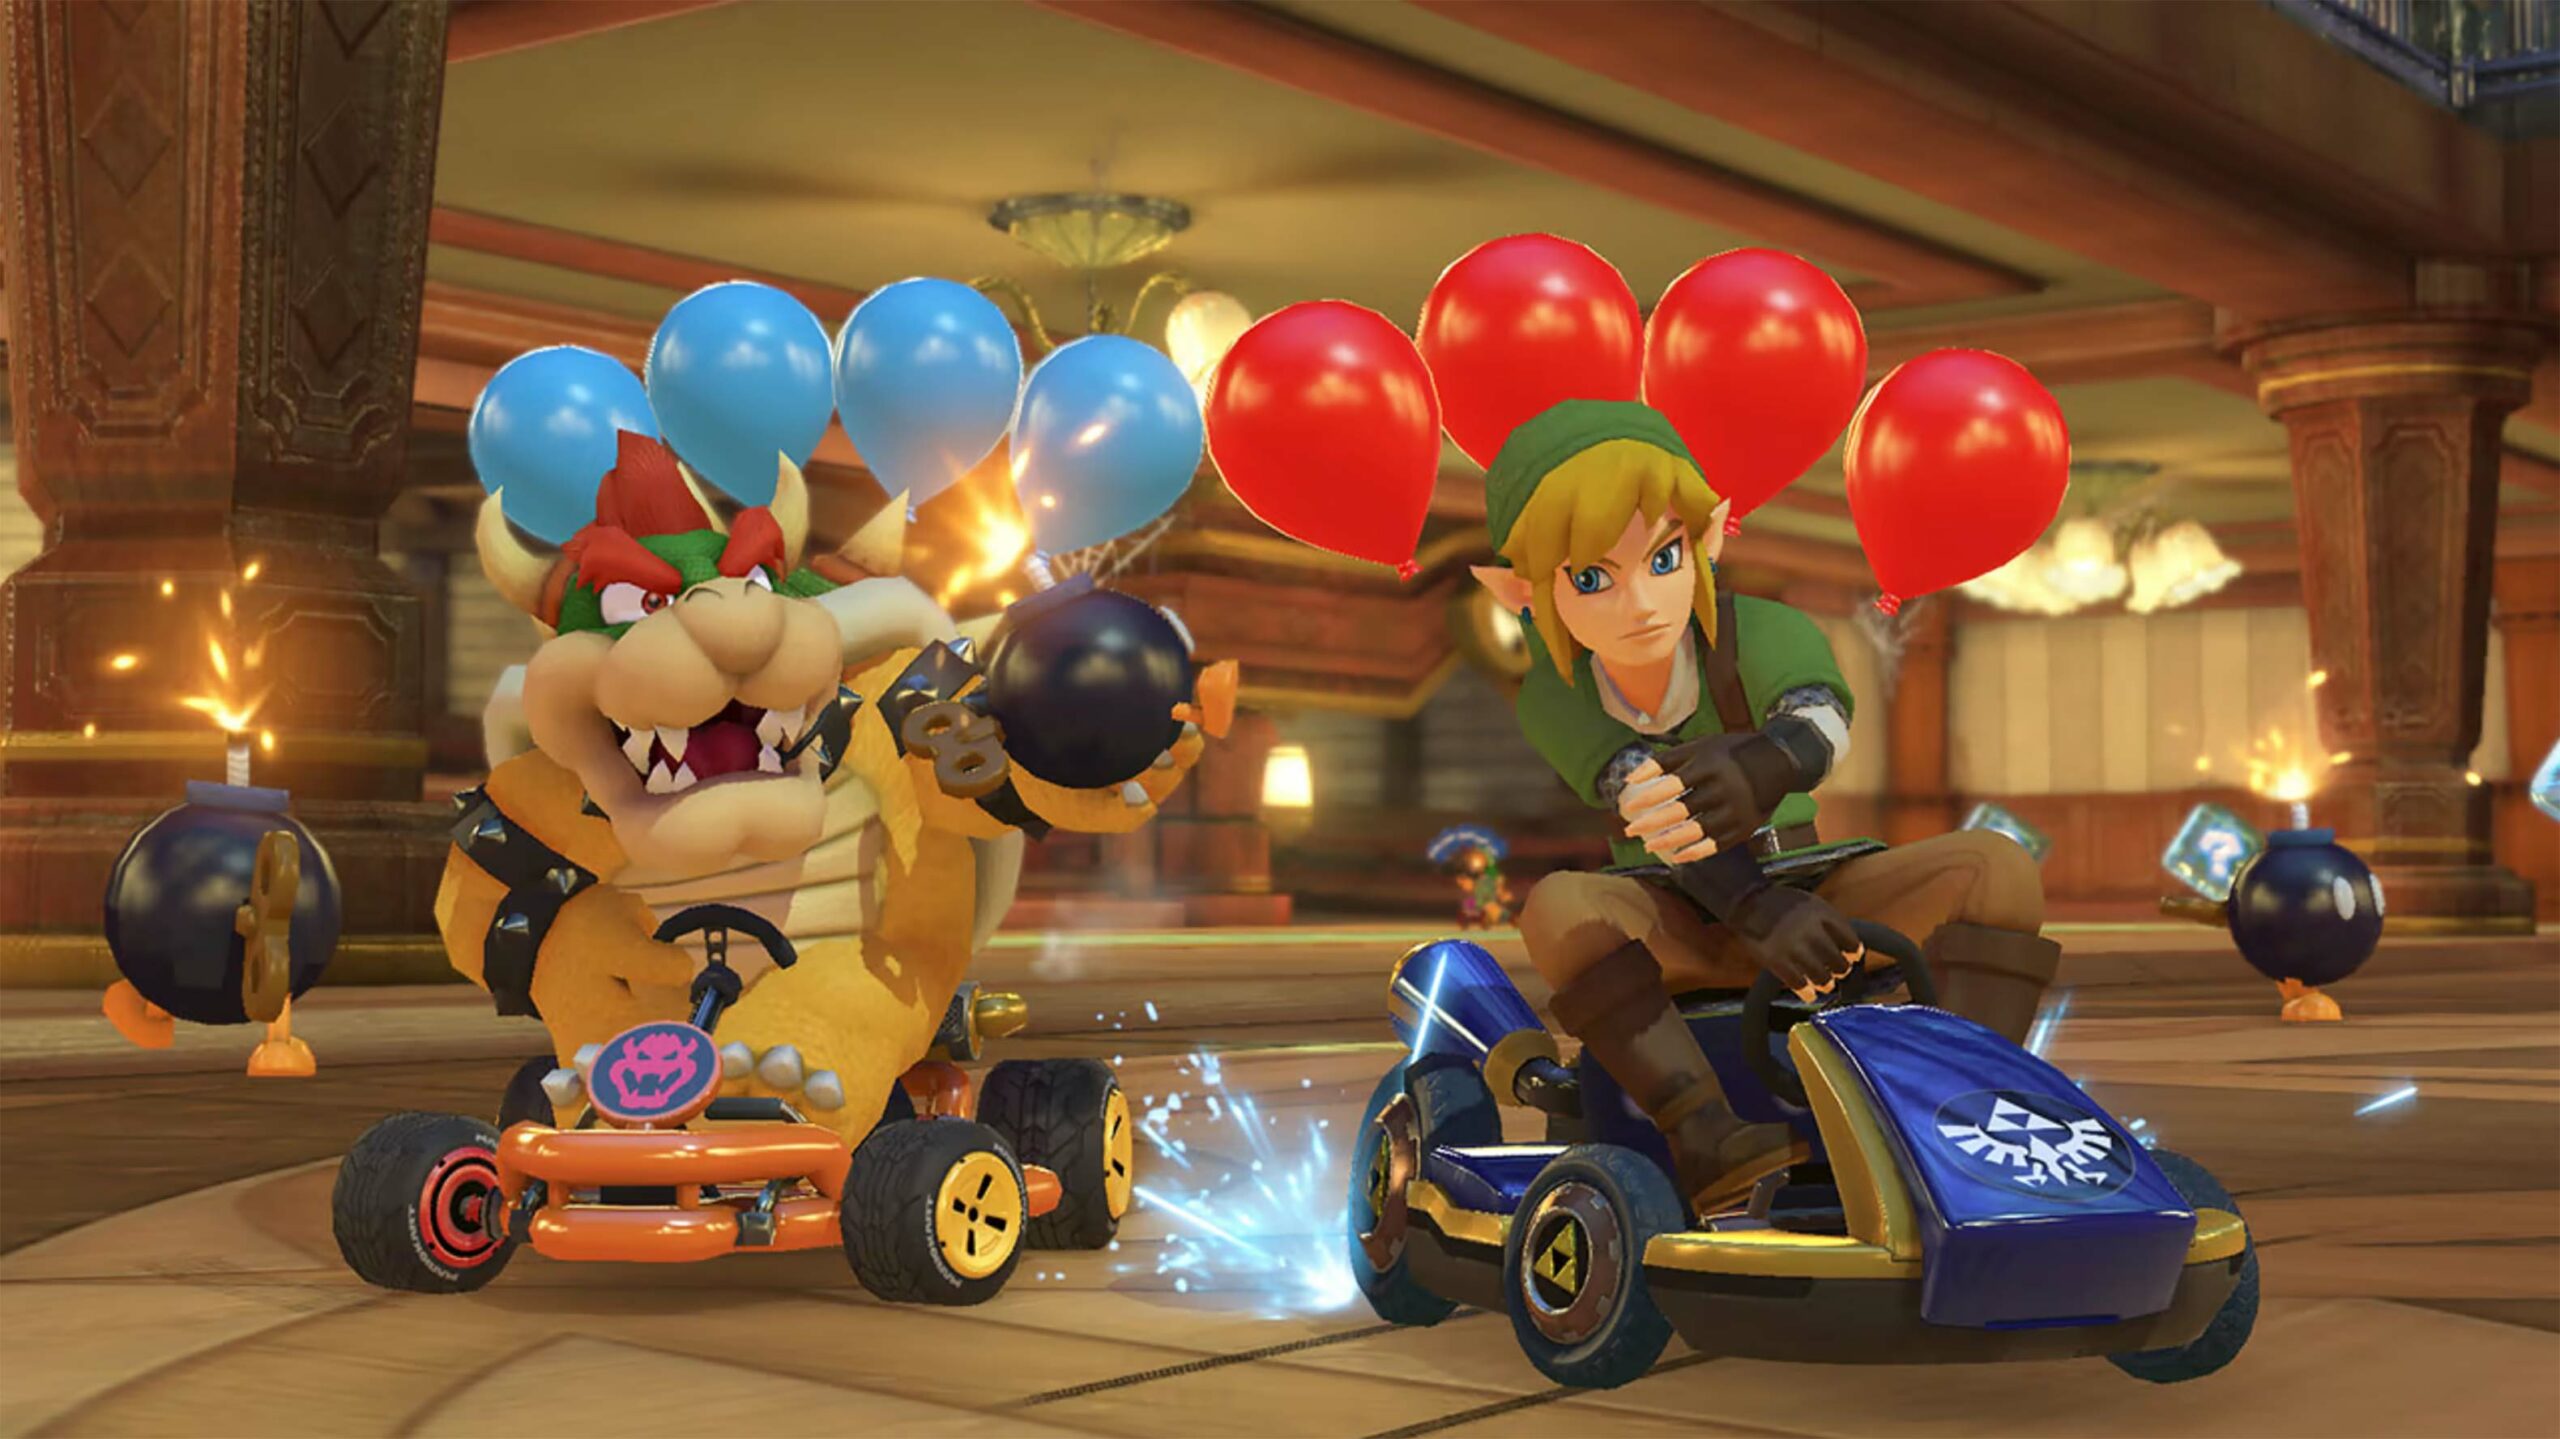 Mario Kart 8 Deluxe Bowser and Link